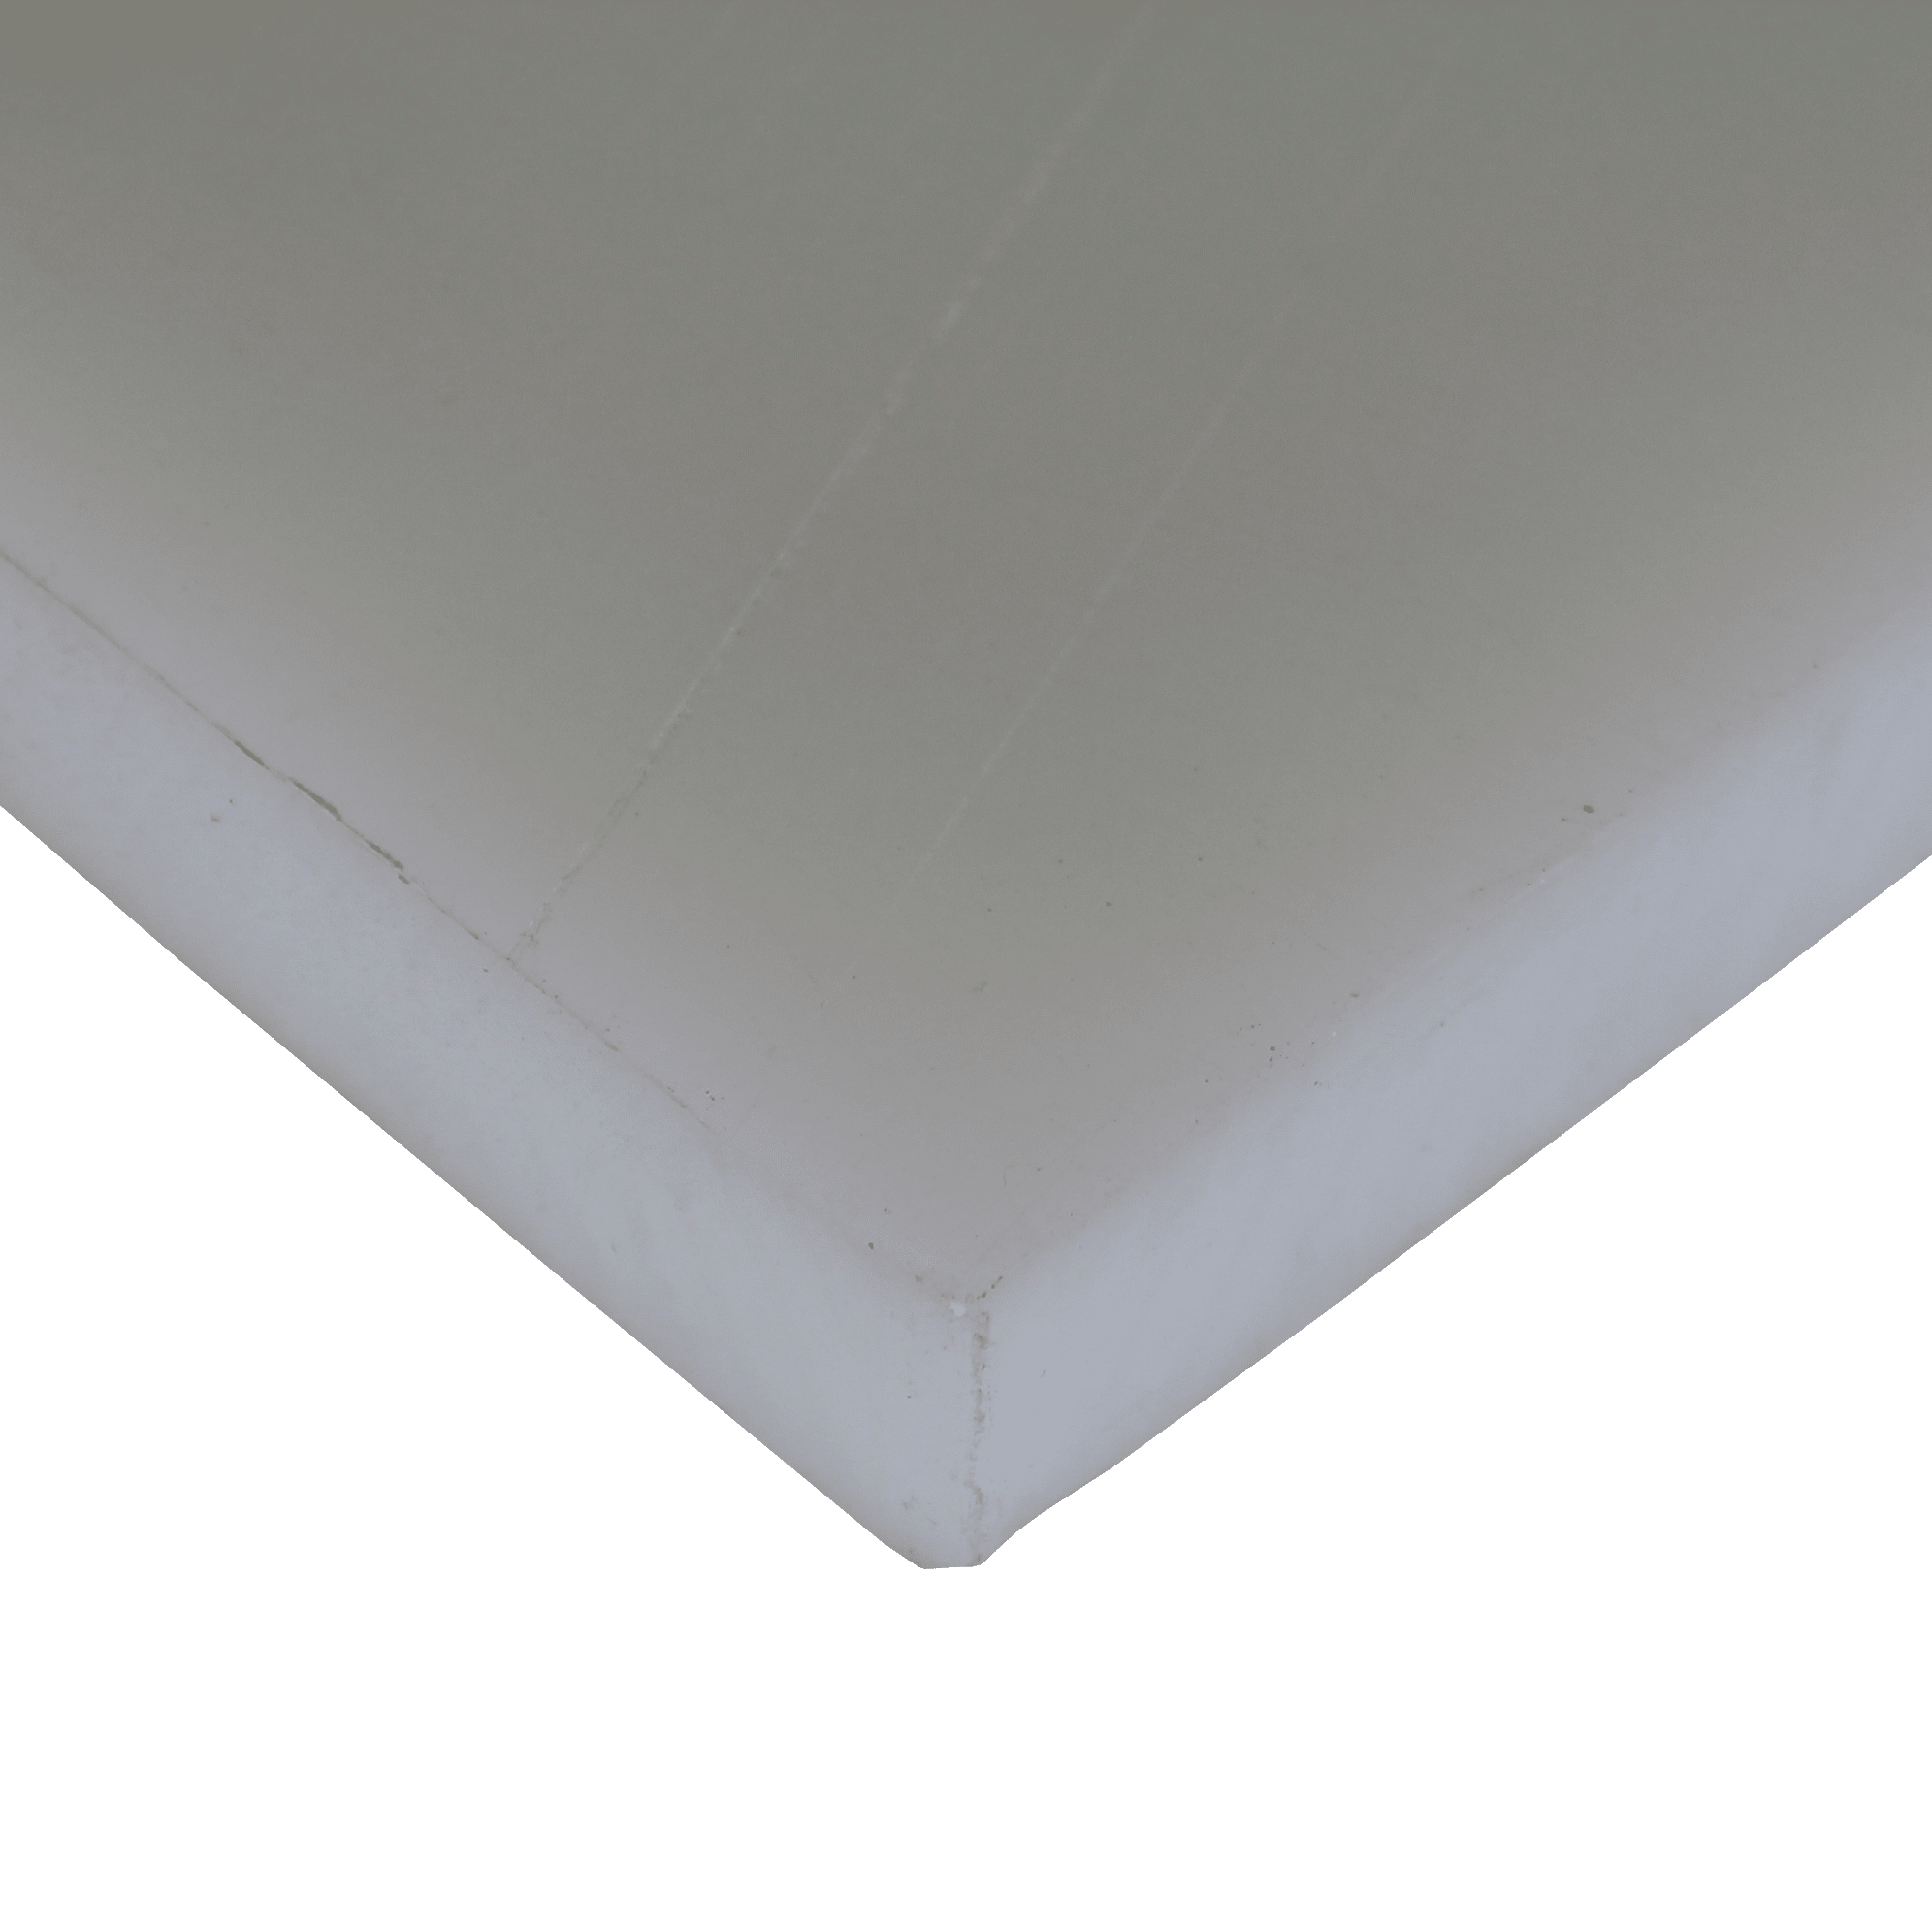 Low Friction Plastic Cutting Board Chopping Board Hdpe Sheet - Buy Low  Friction Plastic Cutting Board Chopping Board Hdpe Sheet Product on